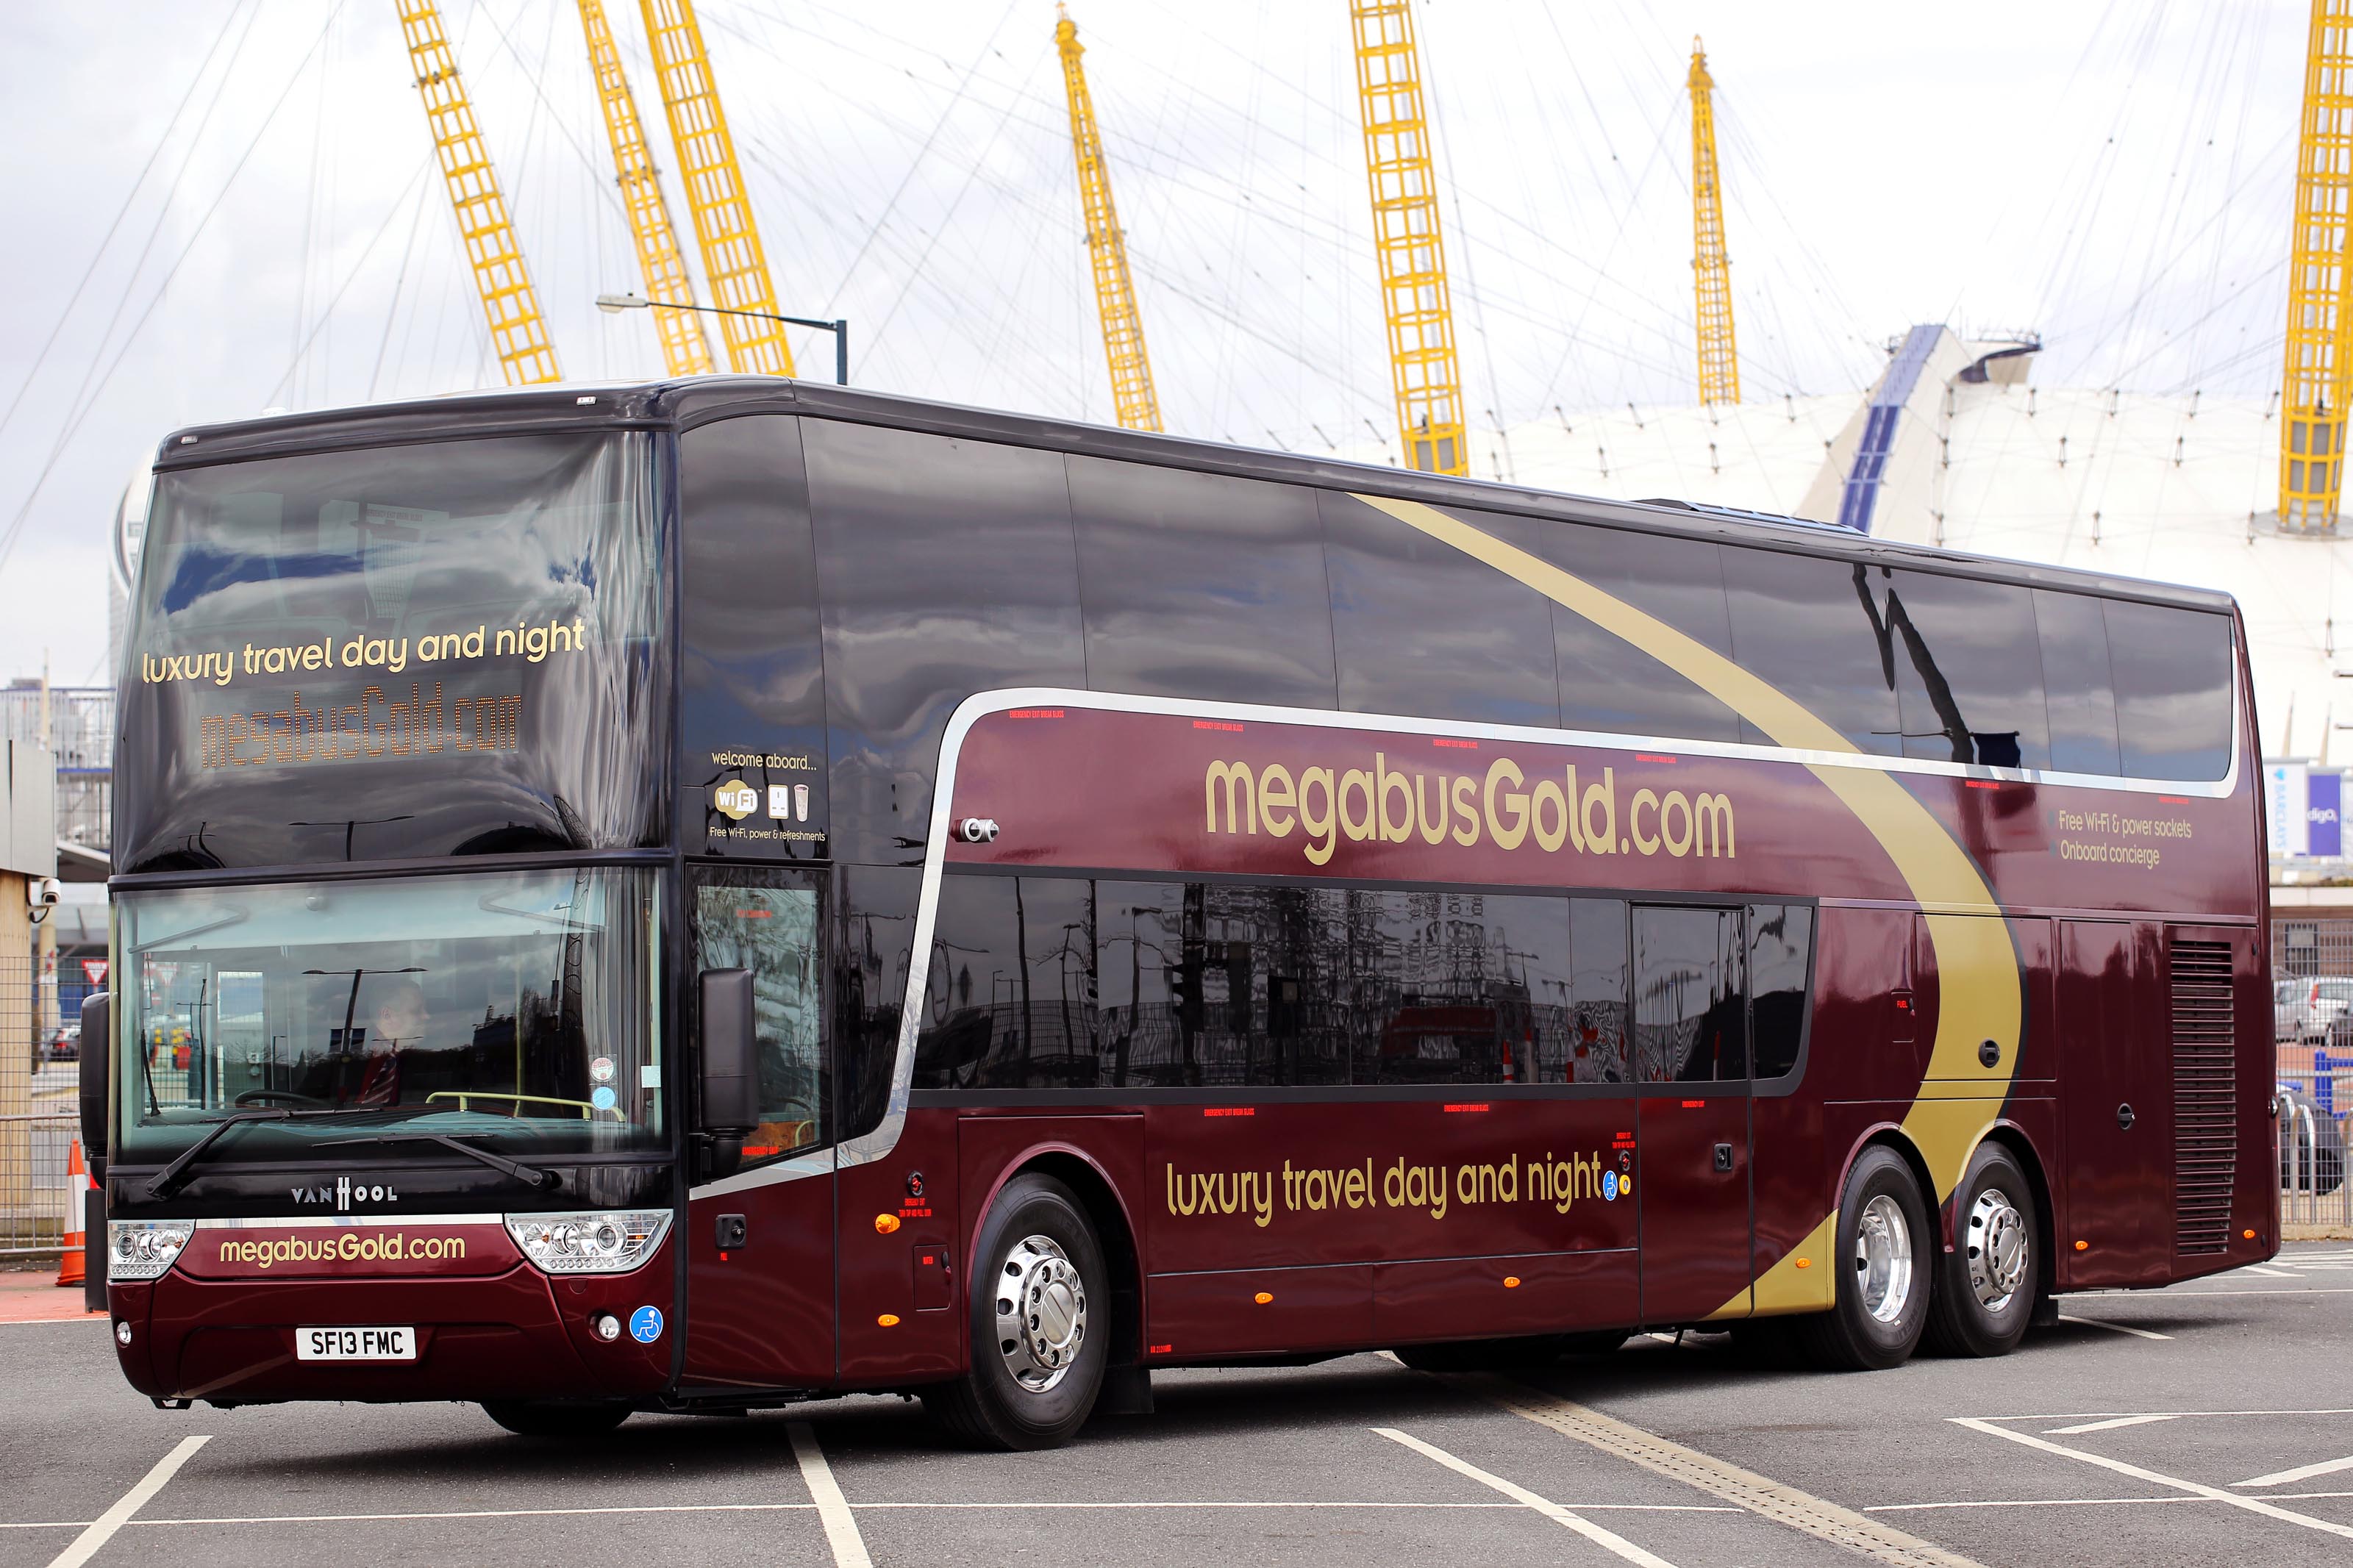 Megabus.com Launches First route linking UK and Italy